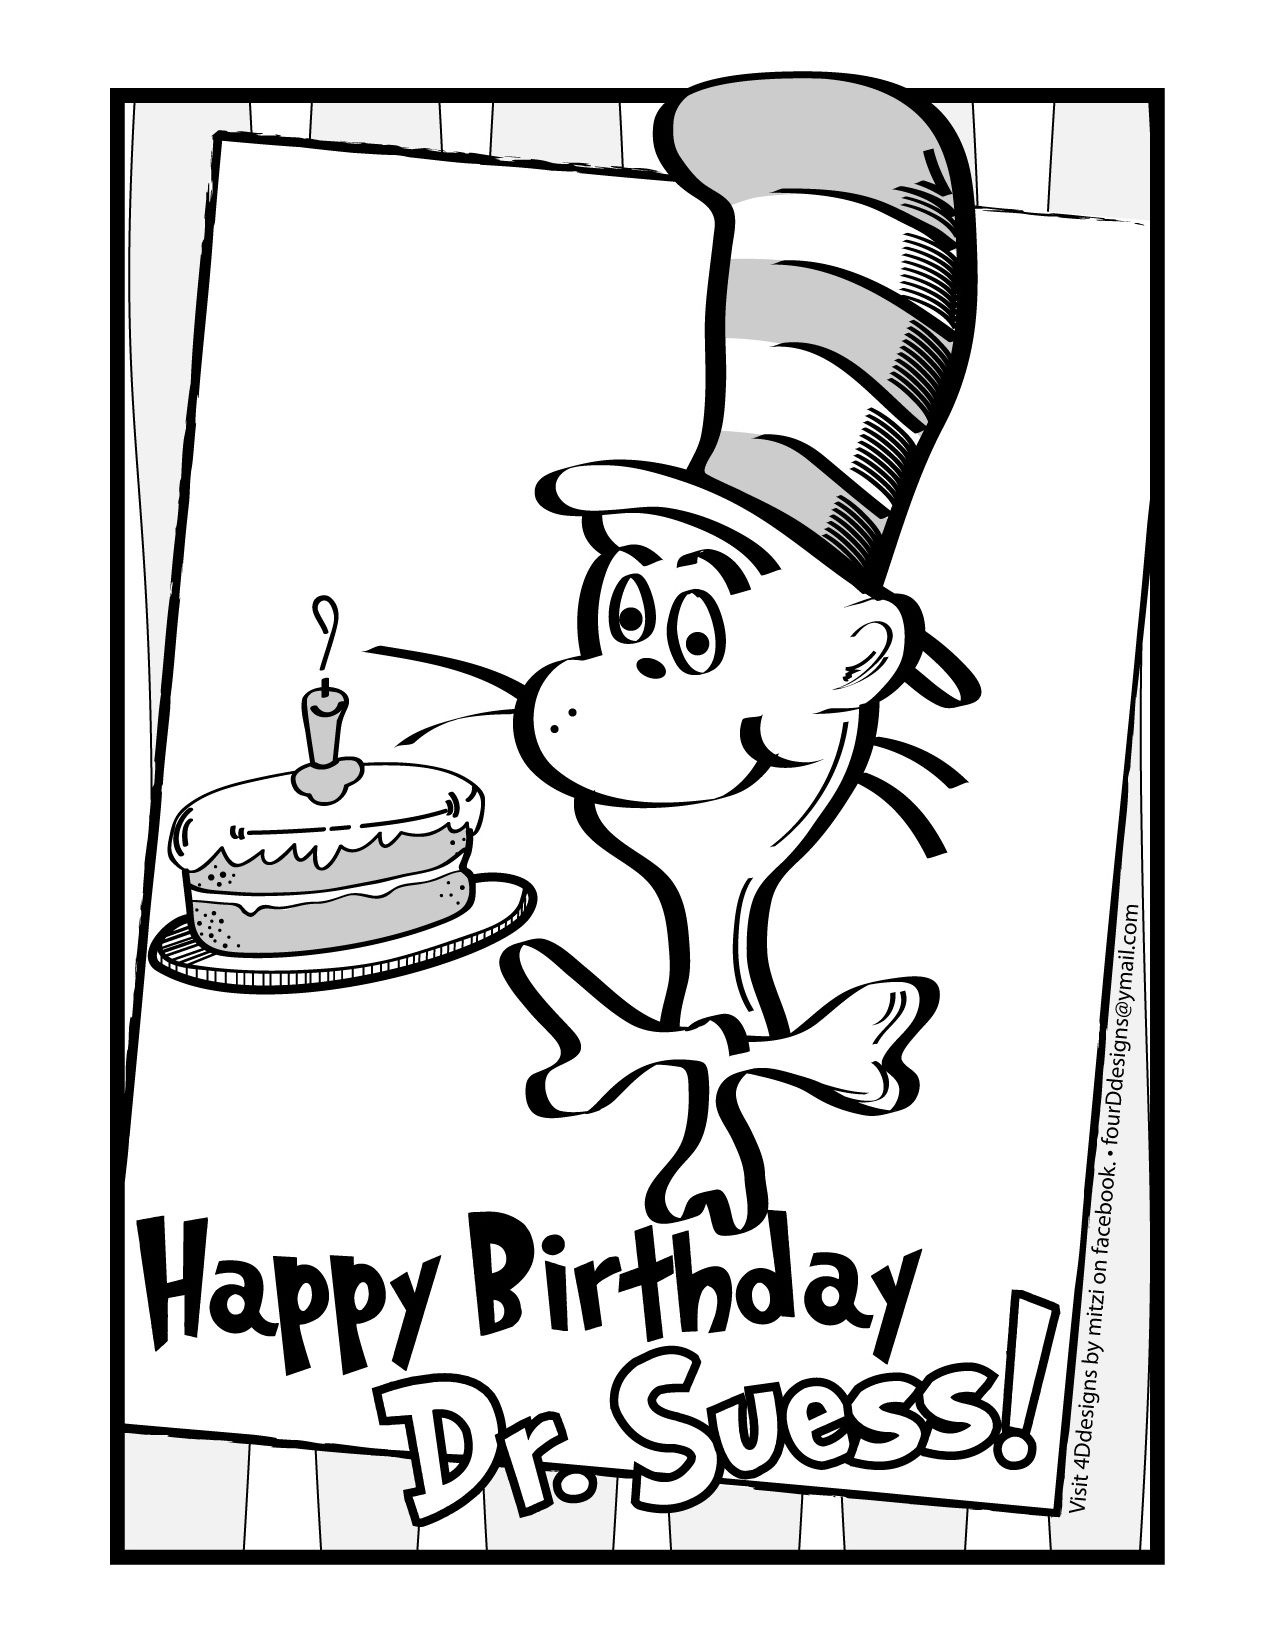 Happy Birthday Dr. Suess! Coloring Page • Free Download | Dr Seuss - Free Printable Dr Seuss Coloring Pages